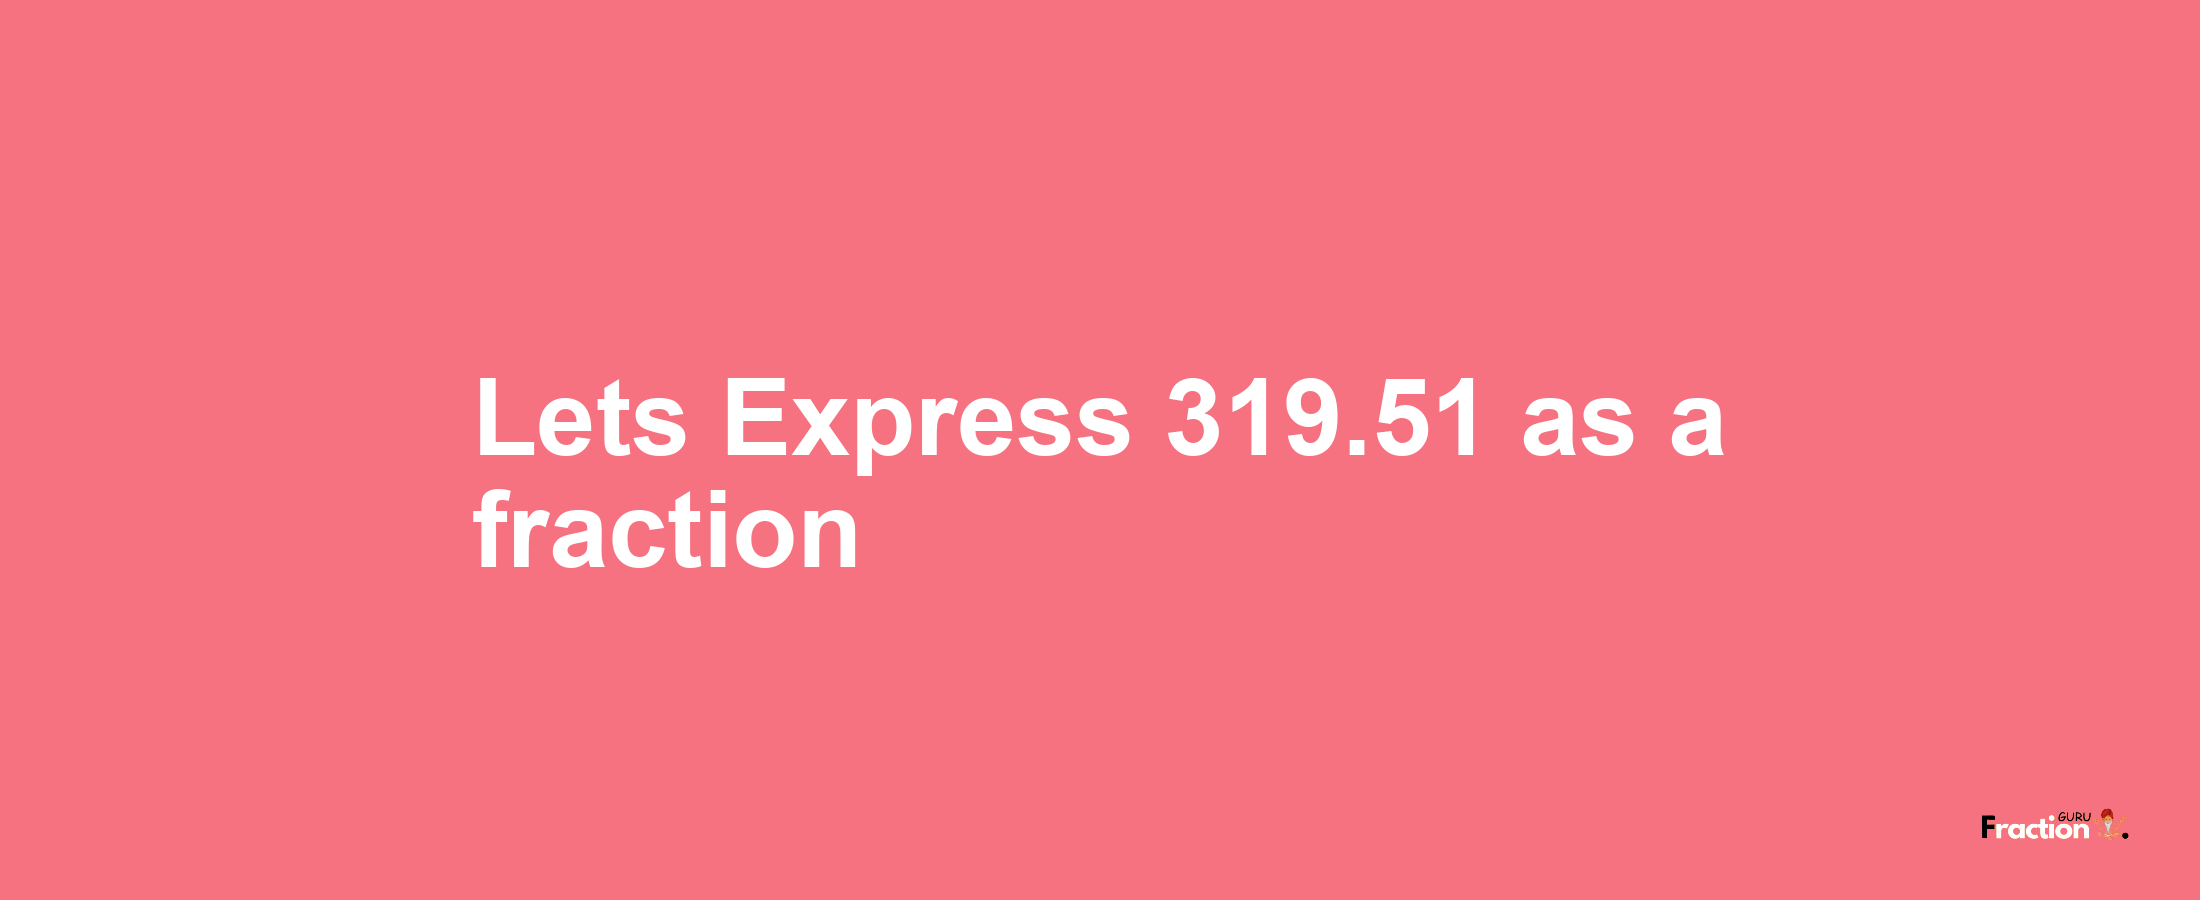 Lets Express 319.51 as afraction